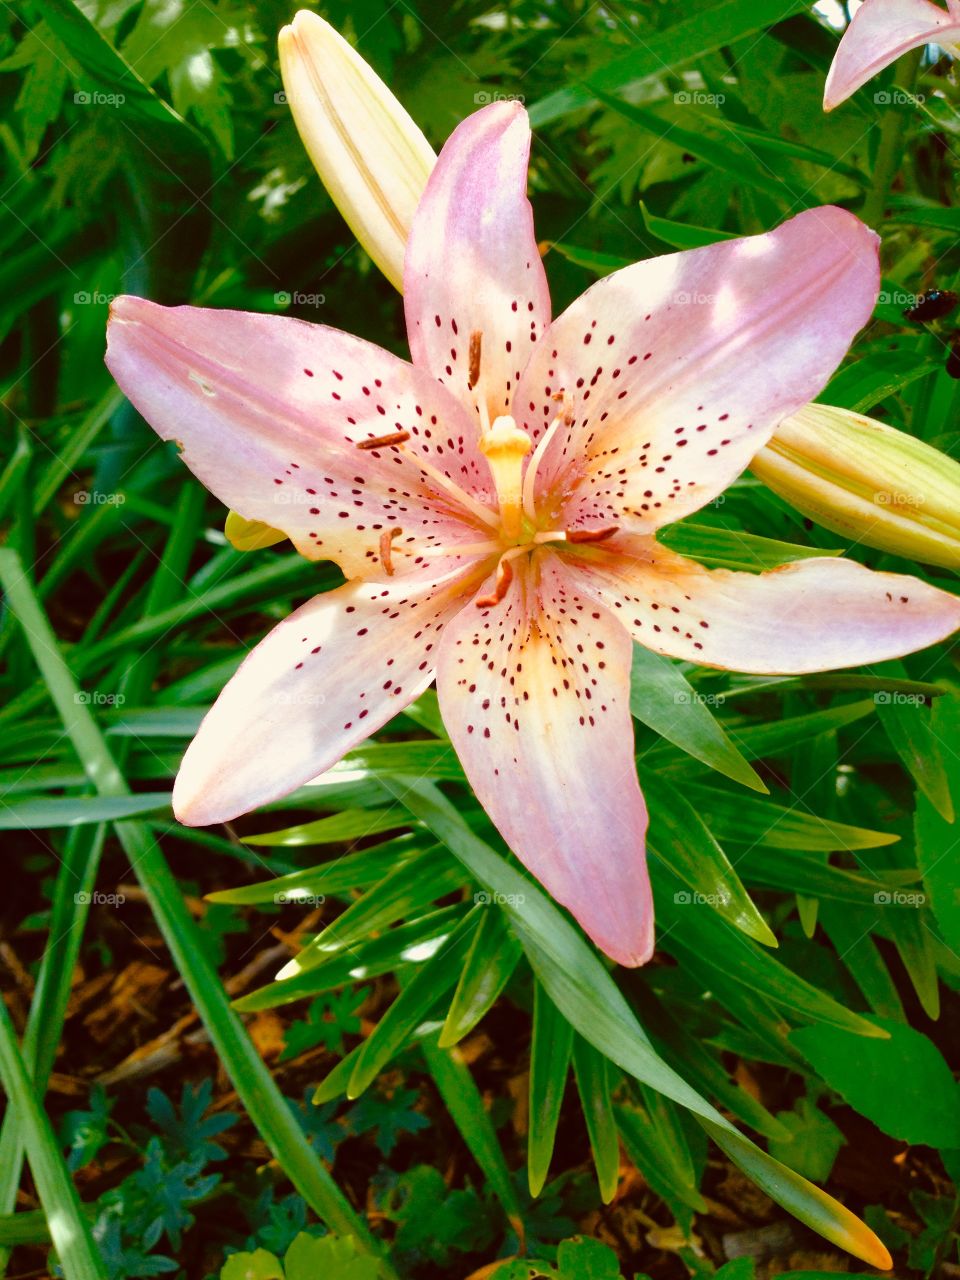 This is a photo of a Lily